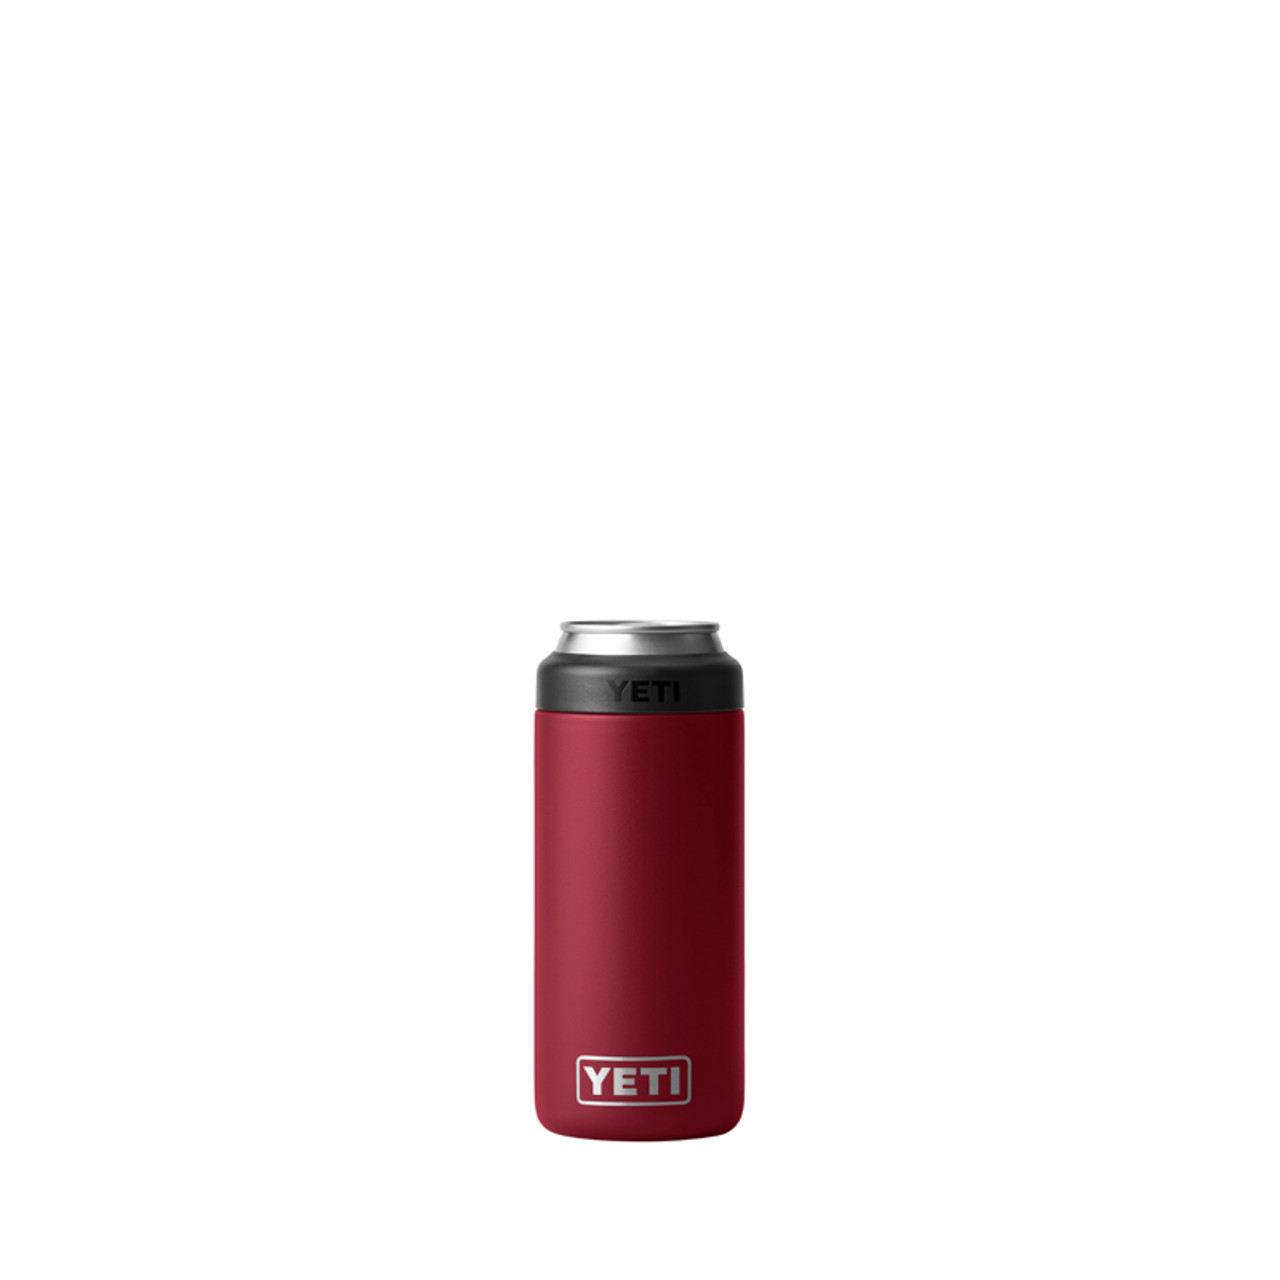 YETI Rambler 16-oz Stainless Steel Colster Tall Can Insulator, Harvest Red  at